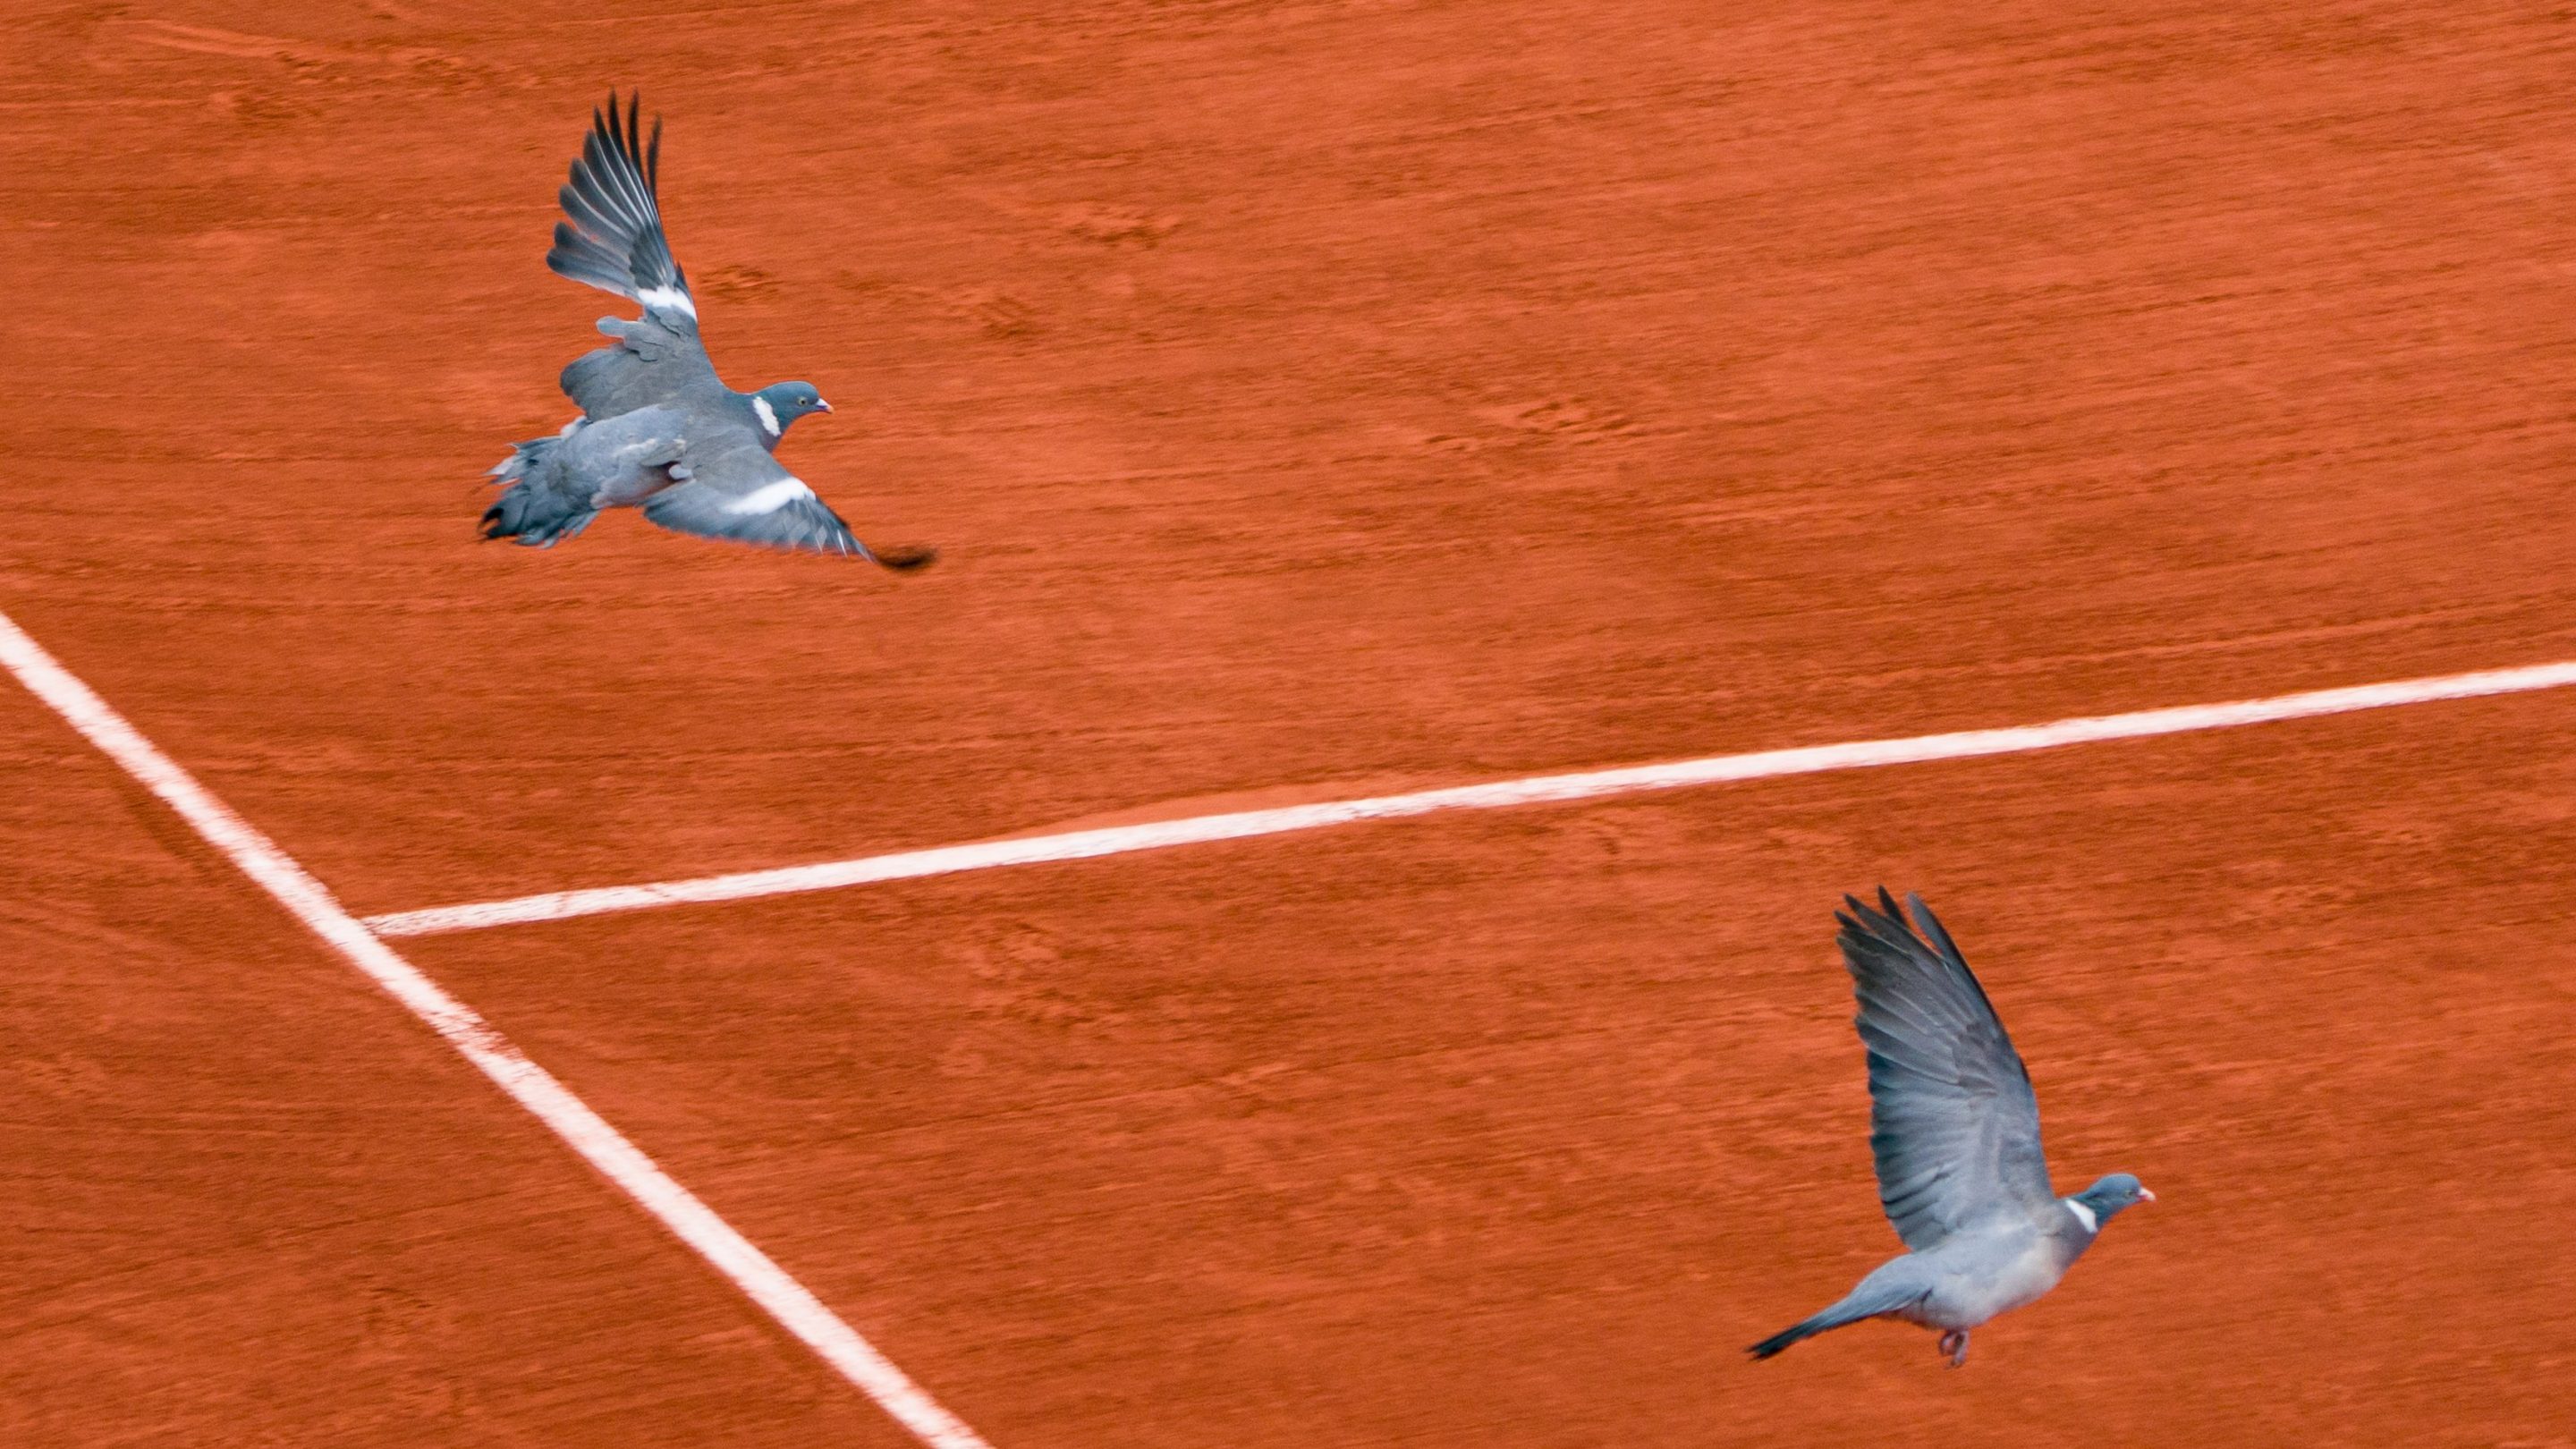 Pigeons disrupt play at the French Open